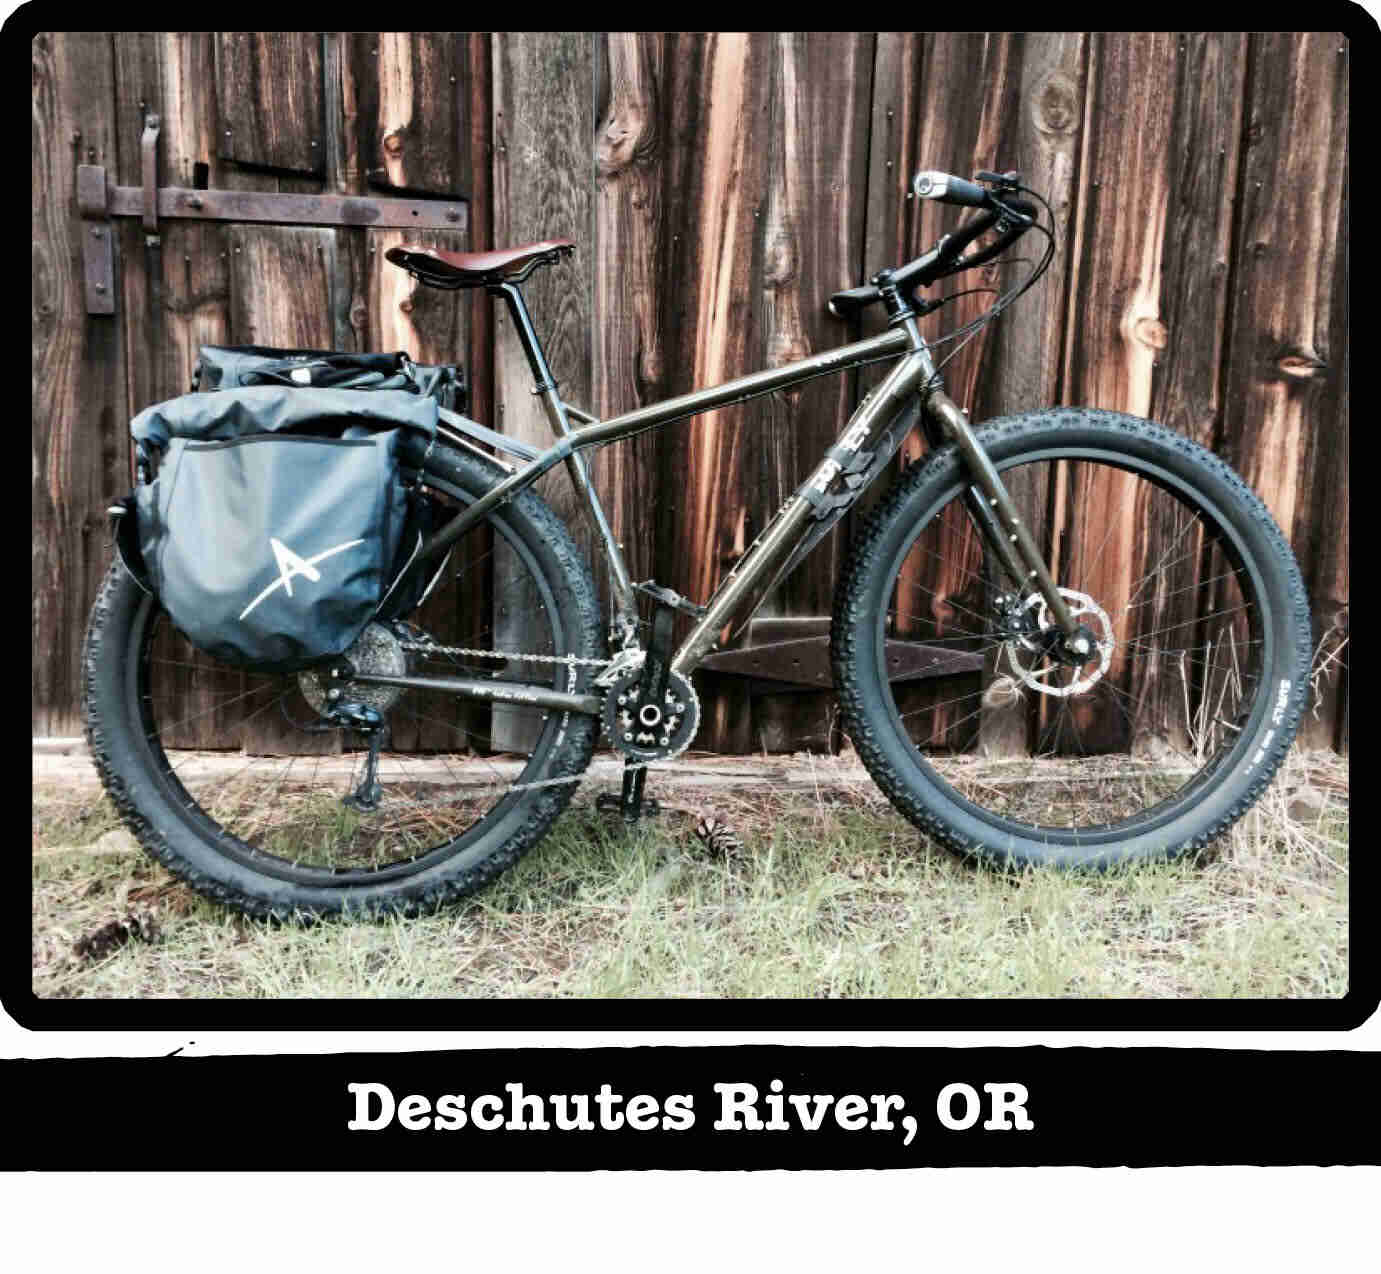 Right side view of a Surly ECR bike, leaning on a wood wall - Deschutes River, OR tag below image